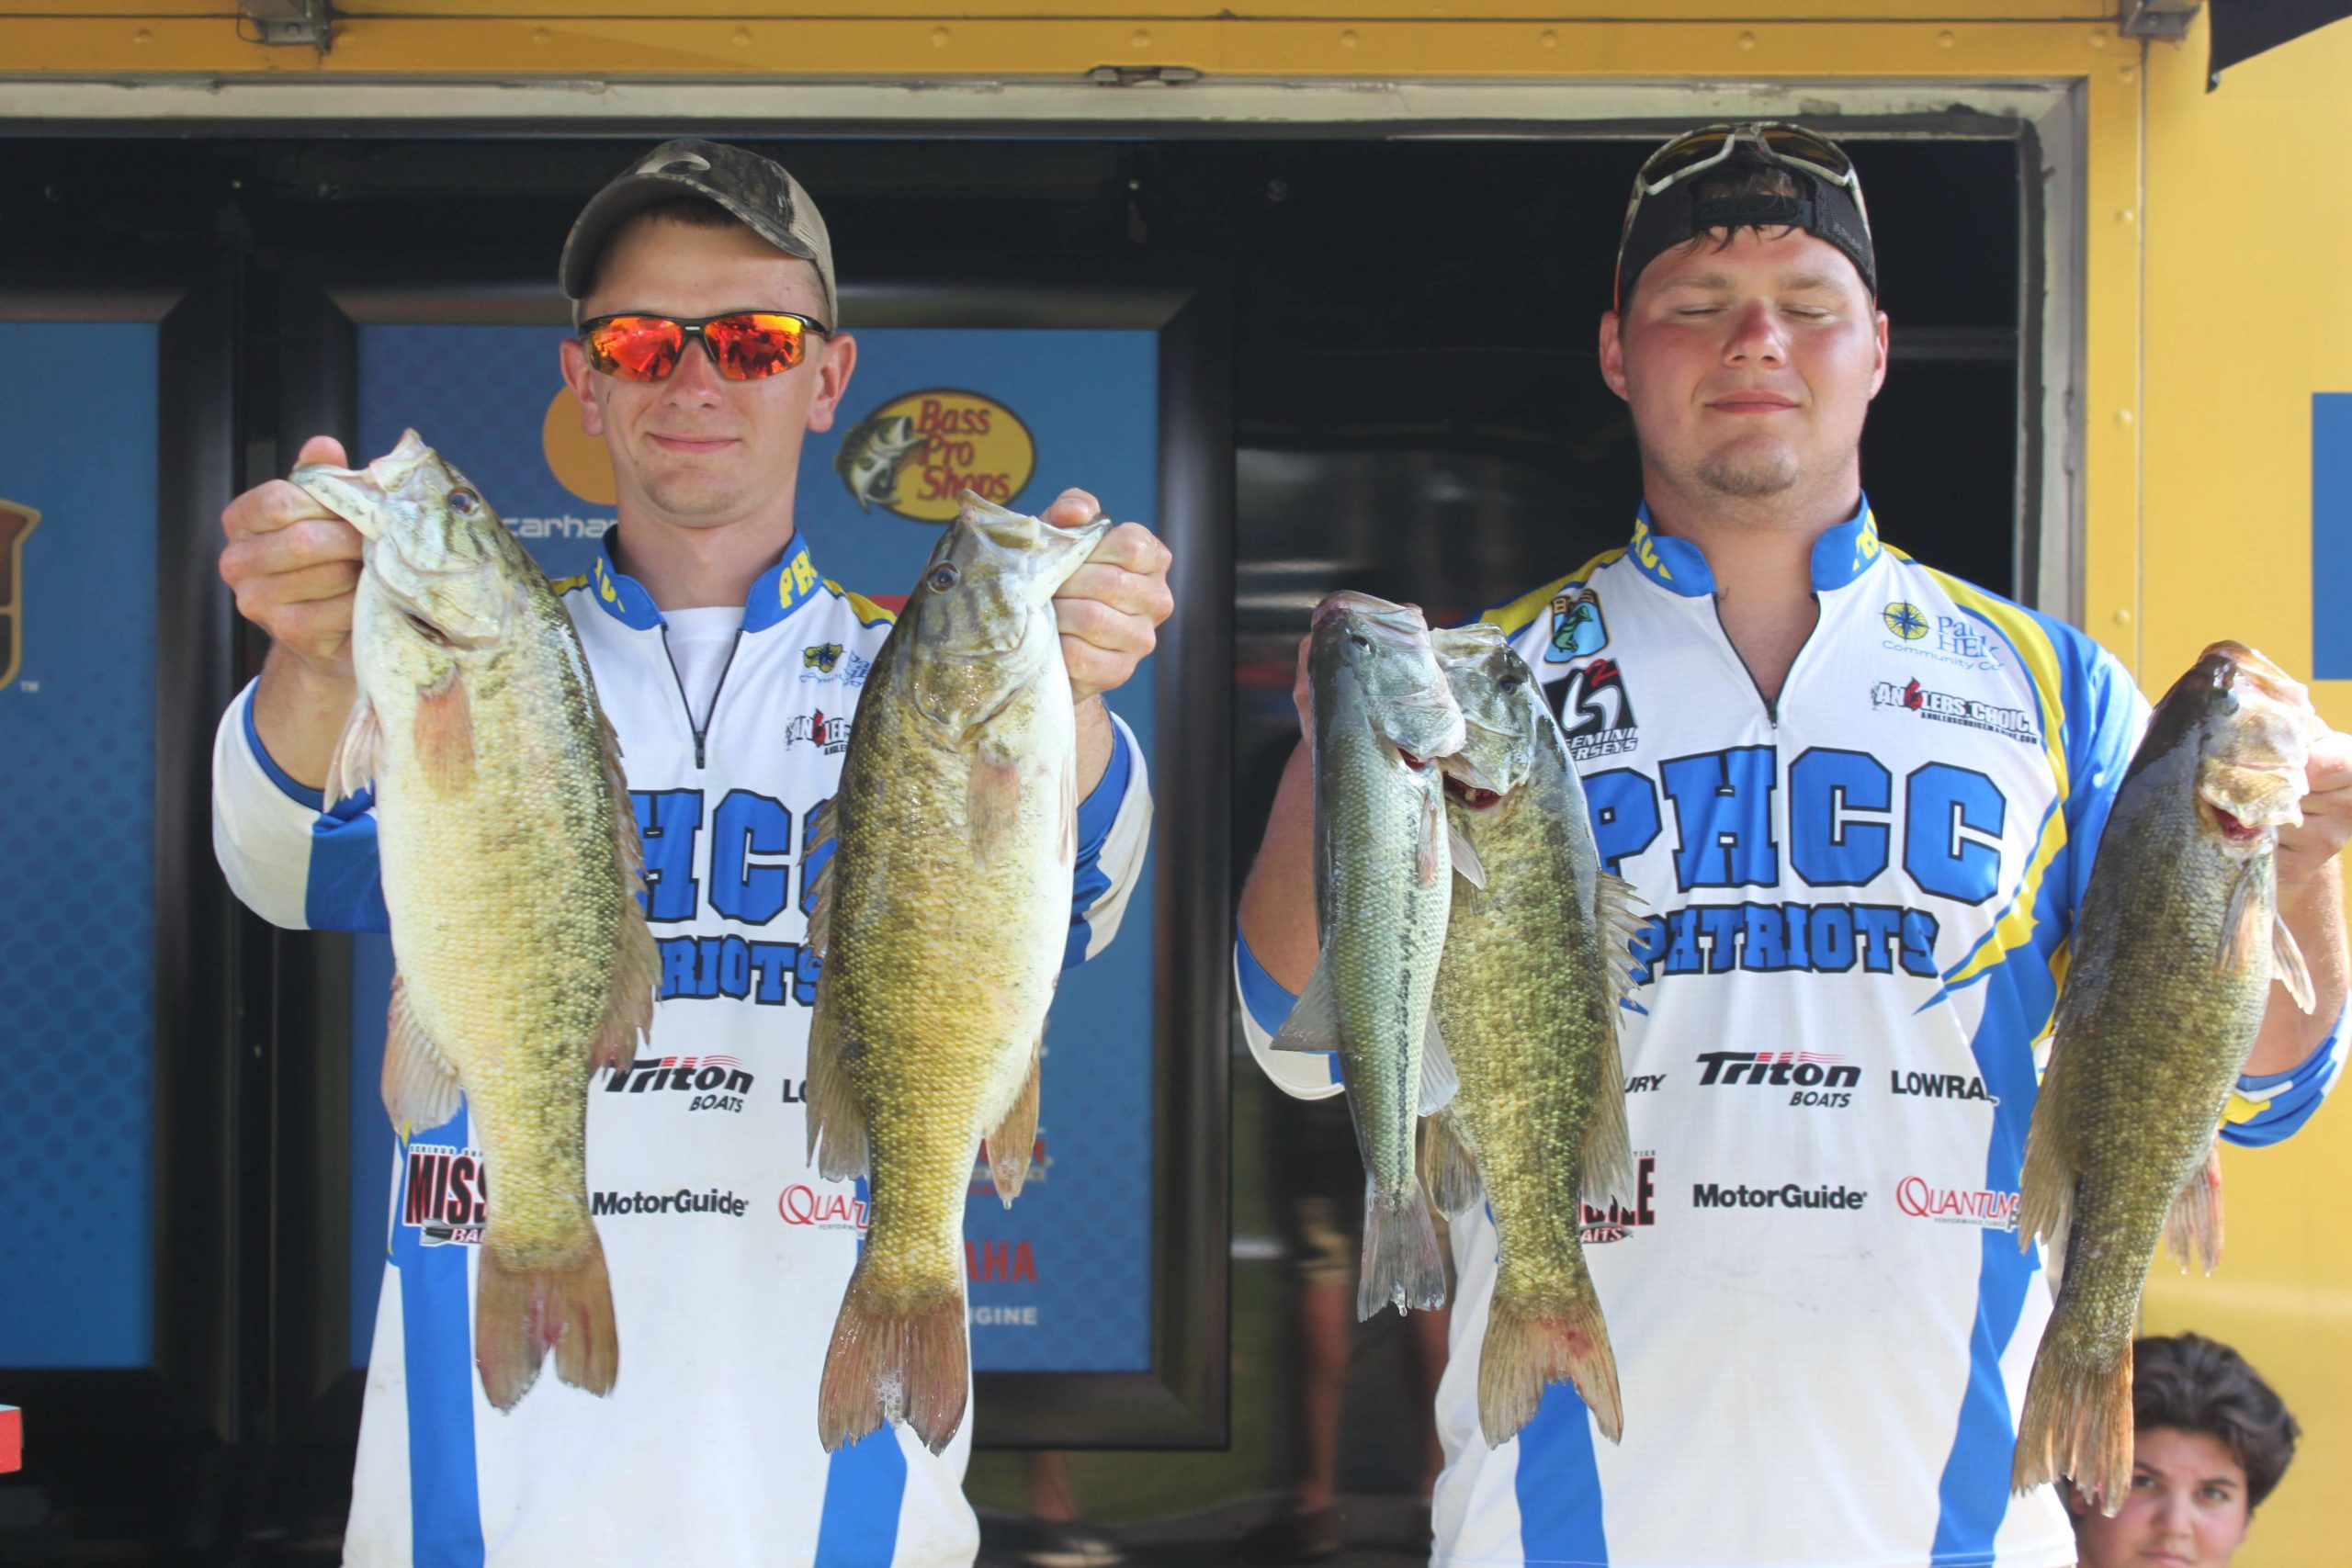 Dillon Bryant and Dustin Wagner of Patrick Henry Community College are in 30th place with 23-13.